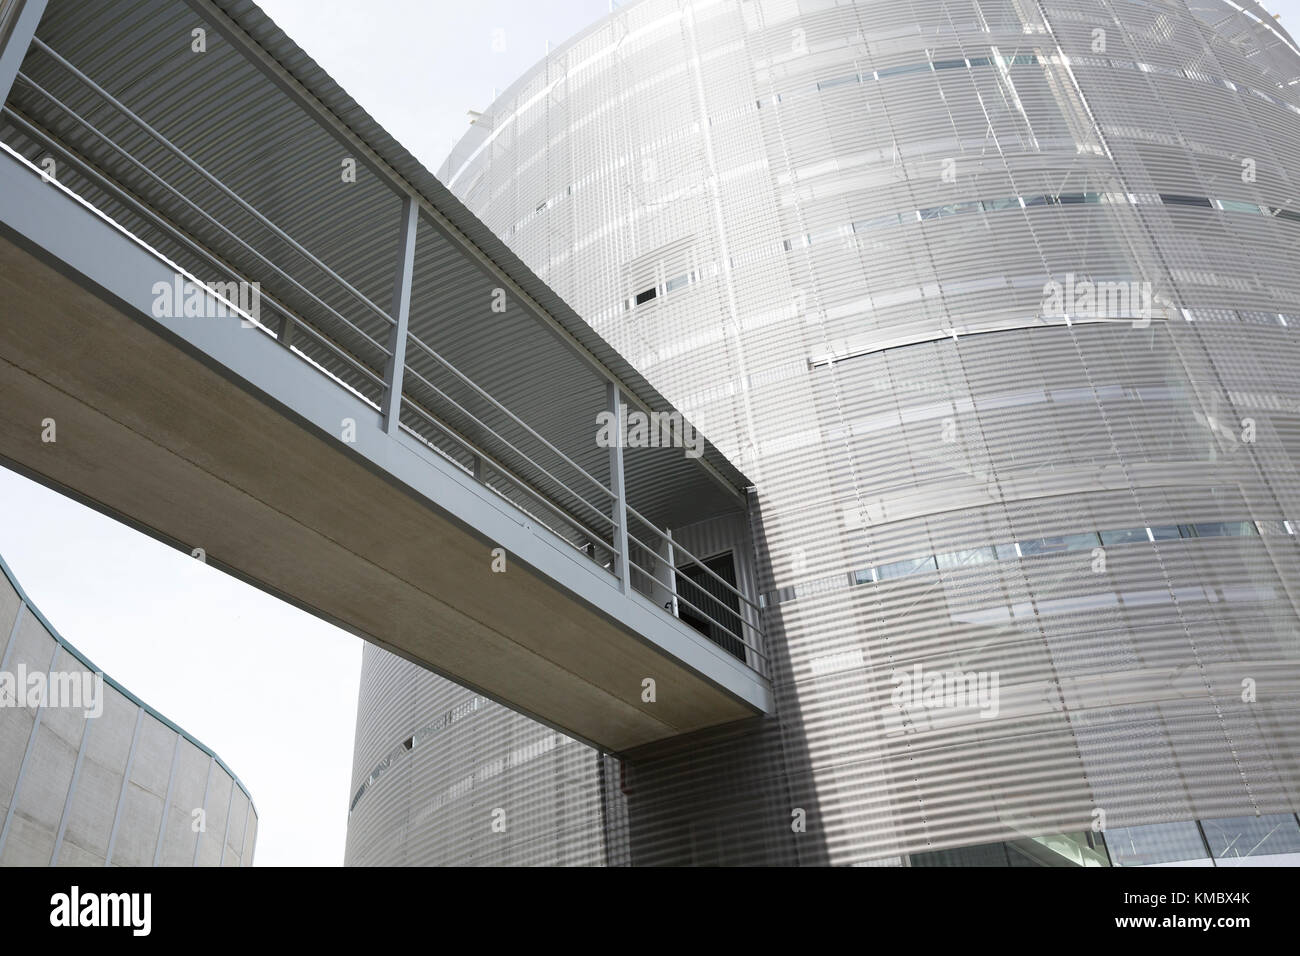 Architectural, modern building and elevated walkway Stock Photo